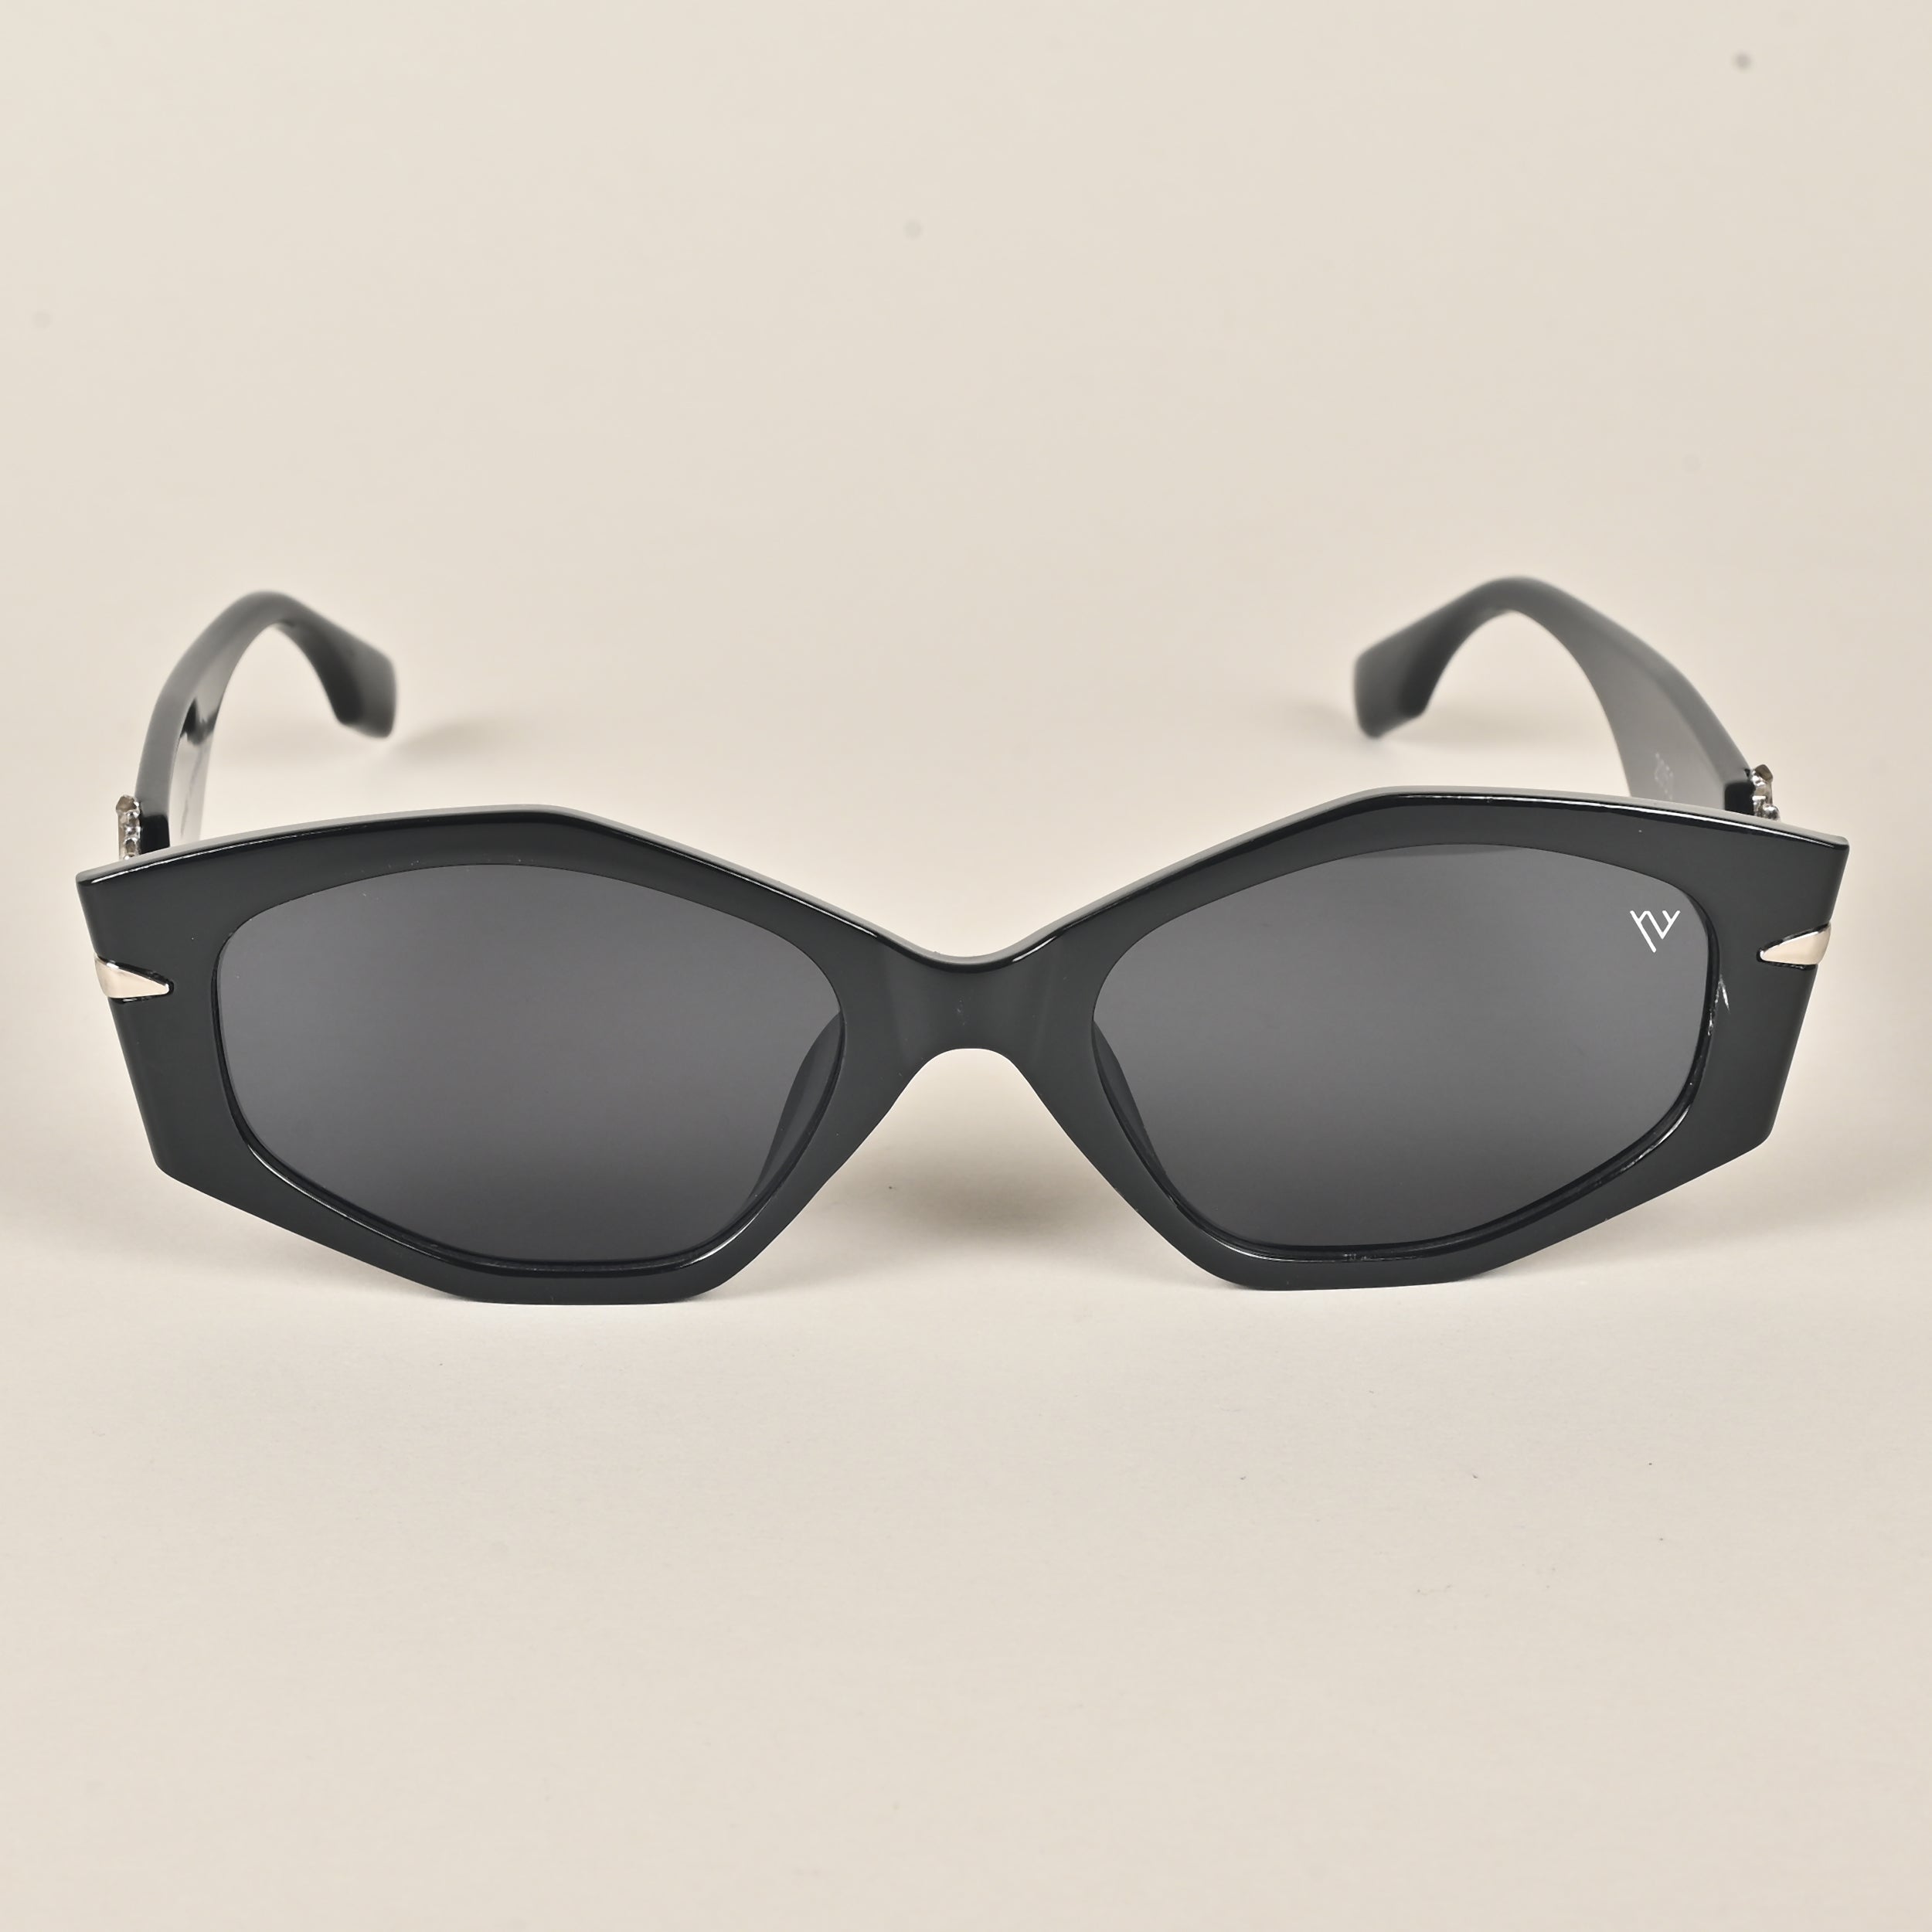 Voyage Black Oval Sunglasses for Women - MG3987